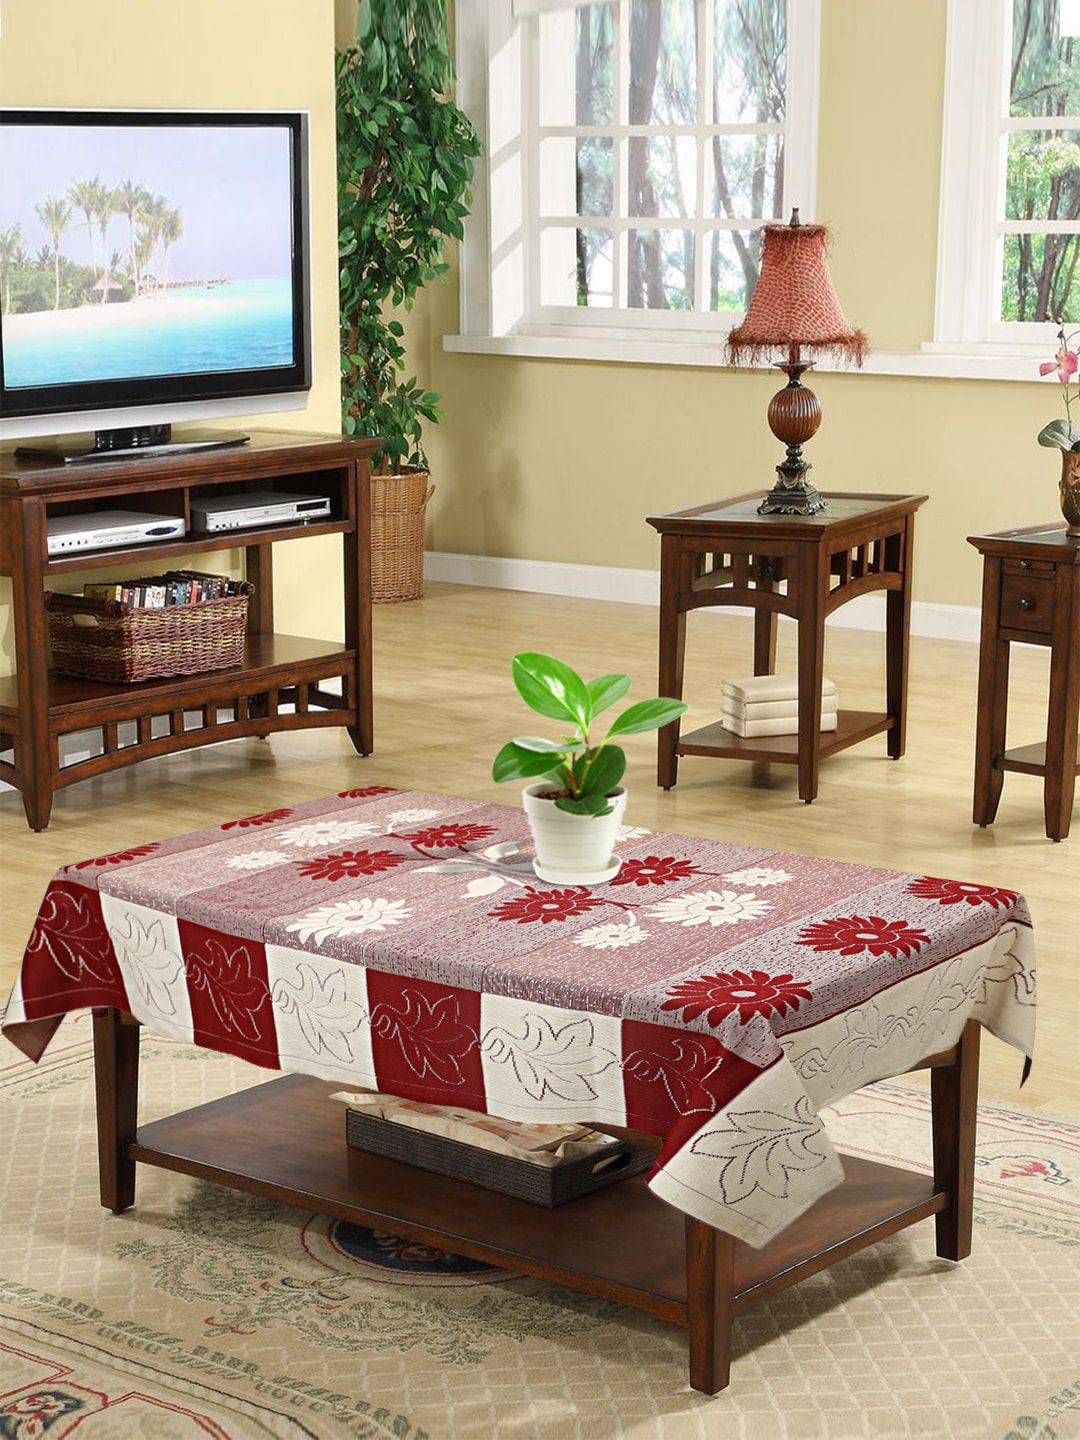 Kuber Industries Red & Cream Flower Print 4 Seater Cotton Table Cover Price in India